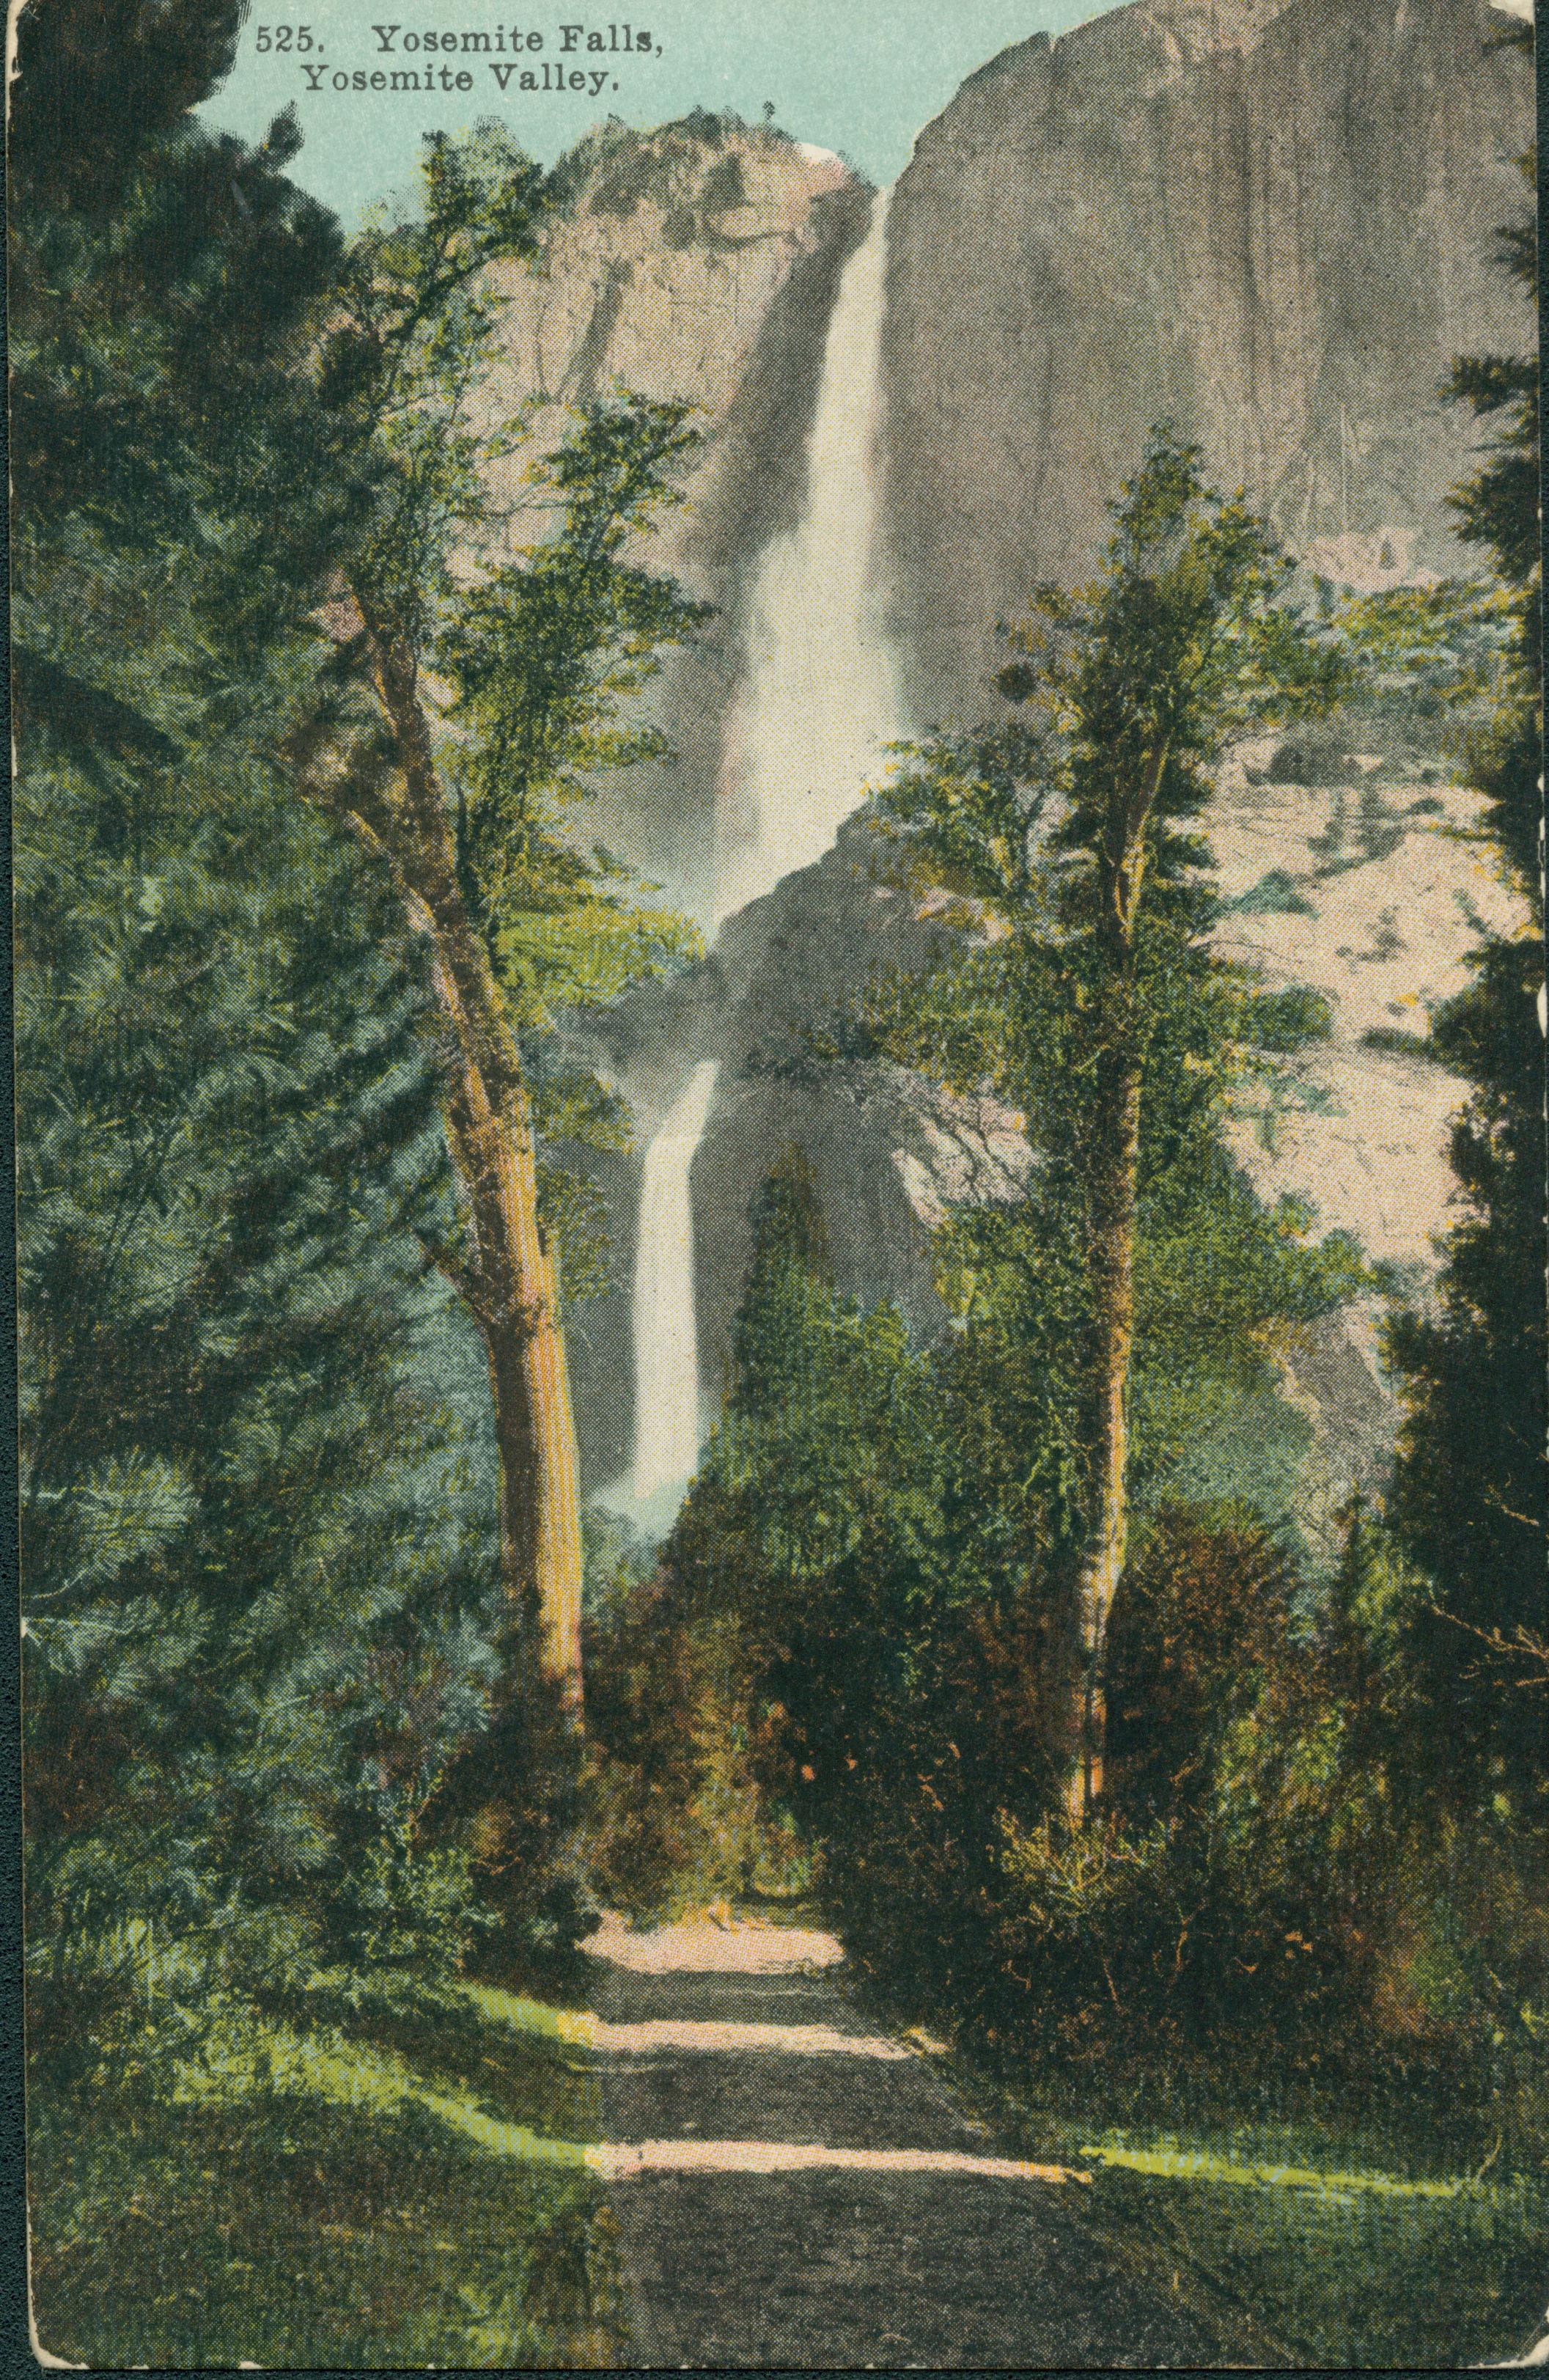 Shows a road lined by trees with Yosemite Falls in the background